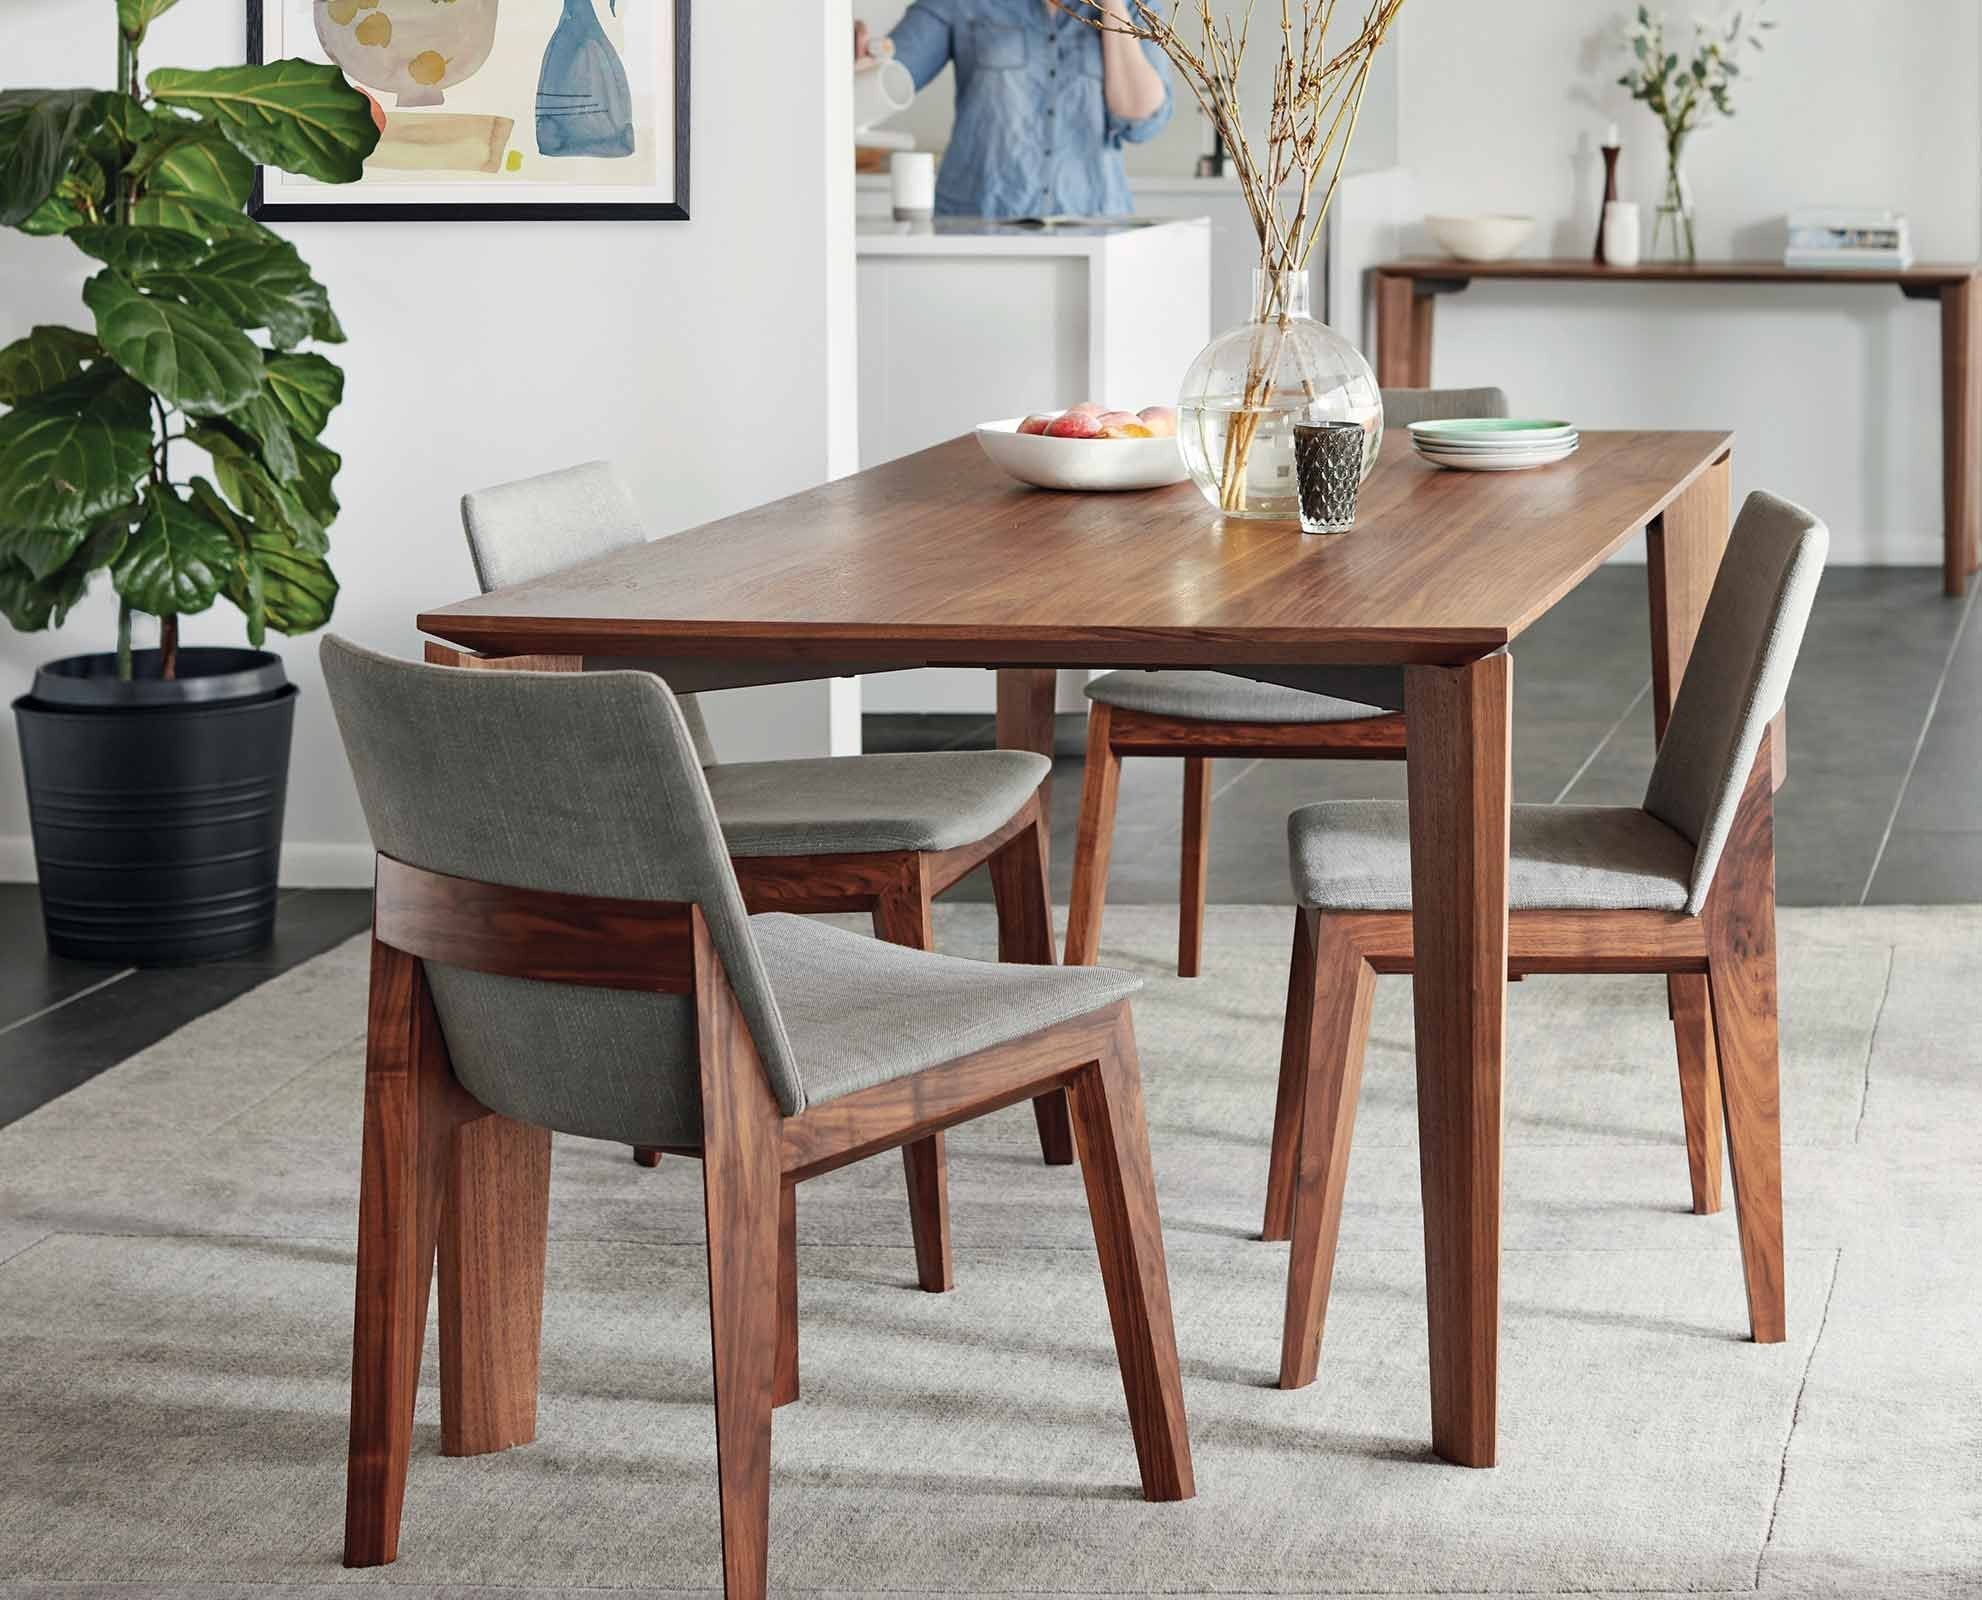 New Mid Century Dining Room Furniture for Living room